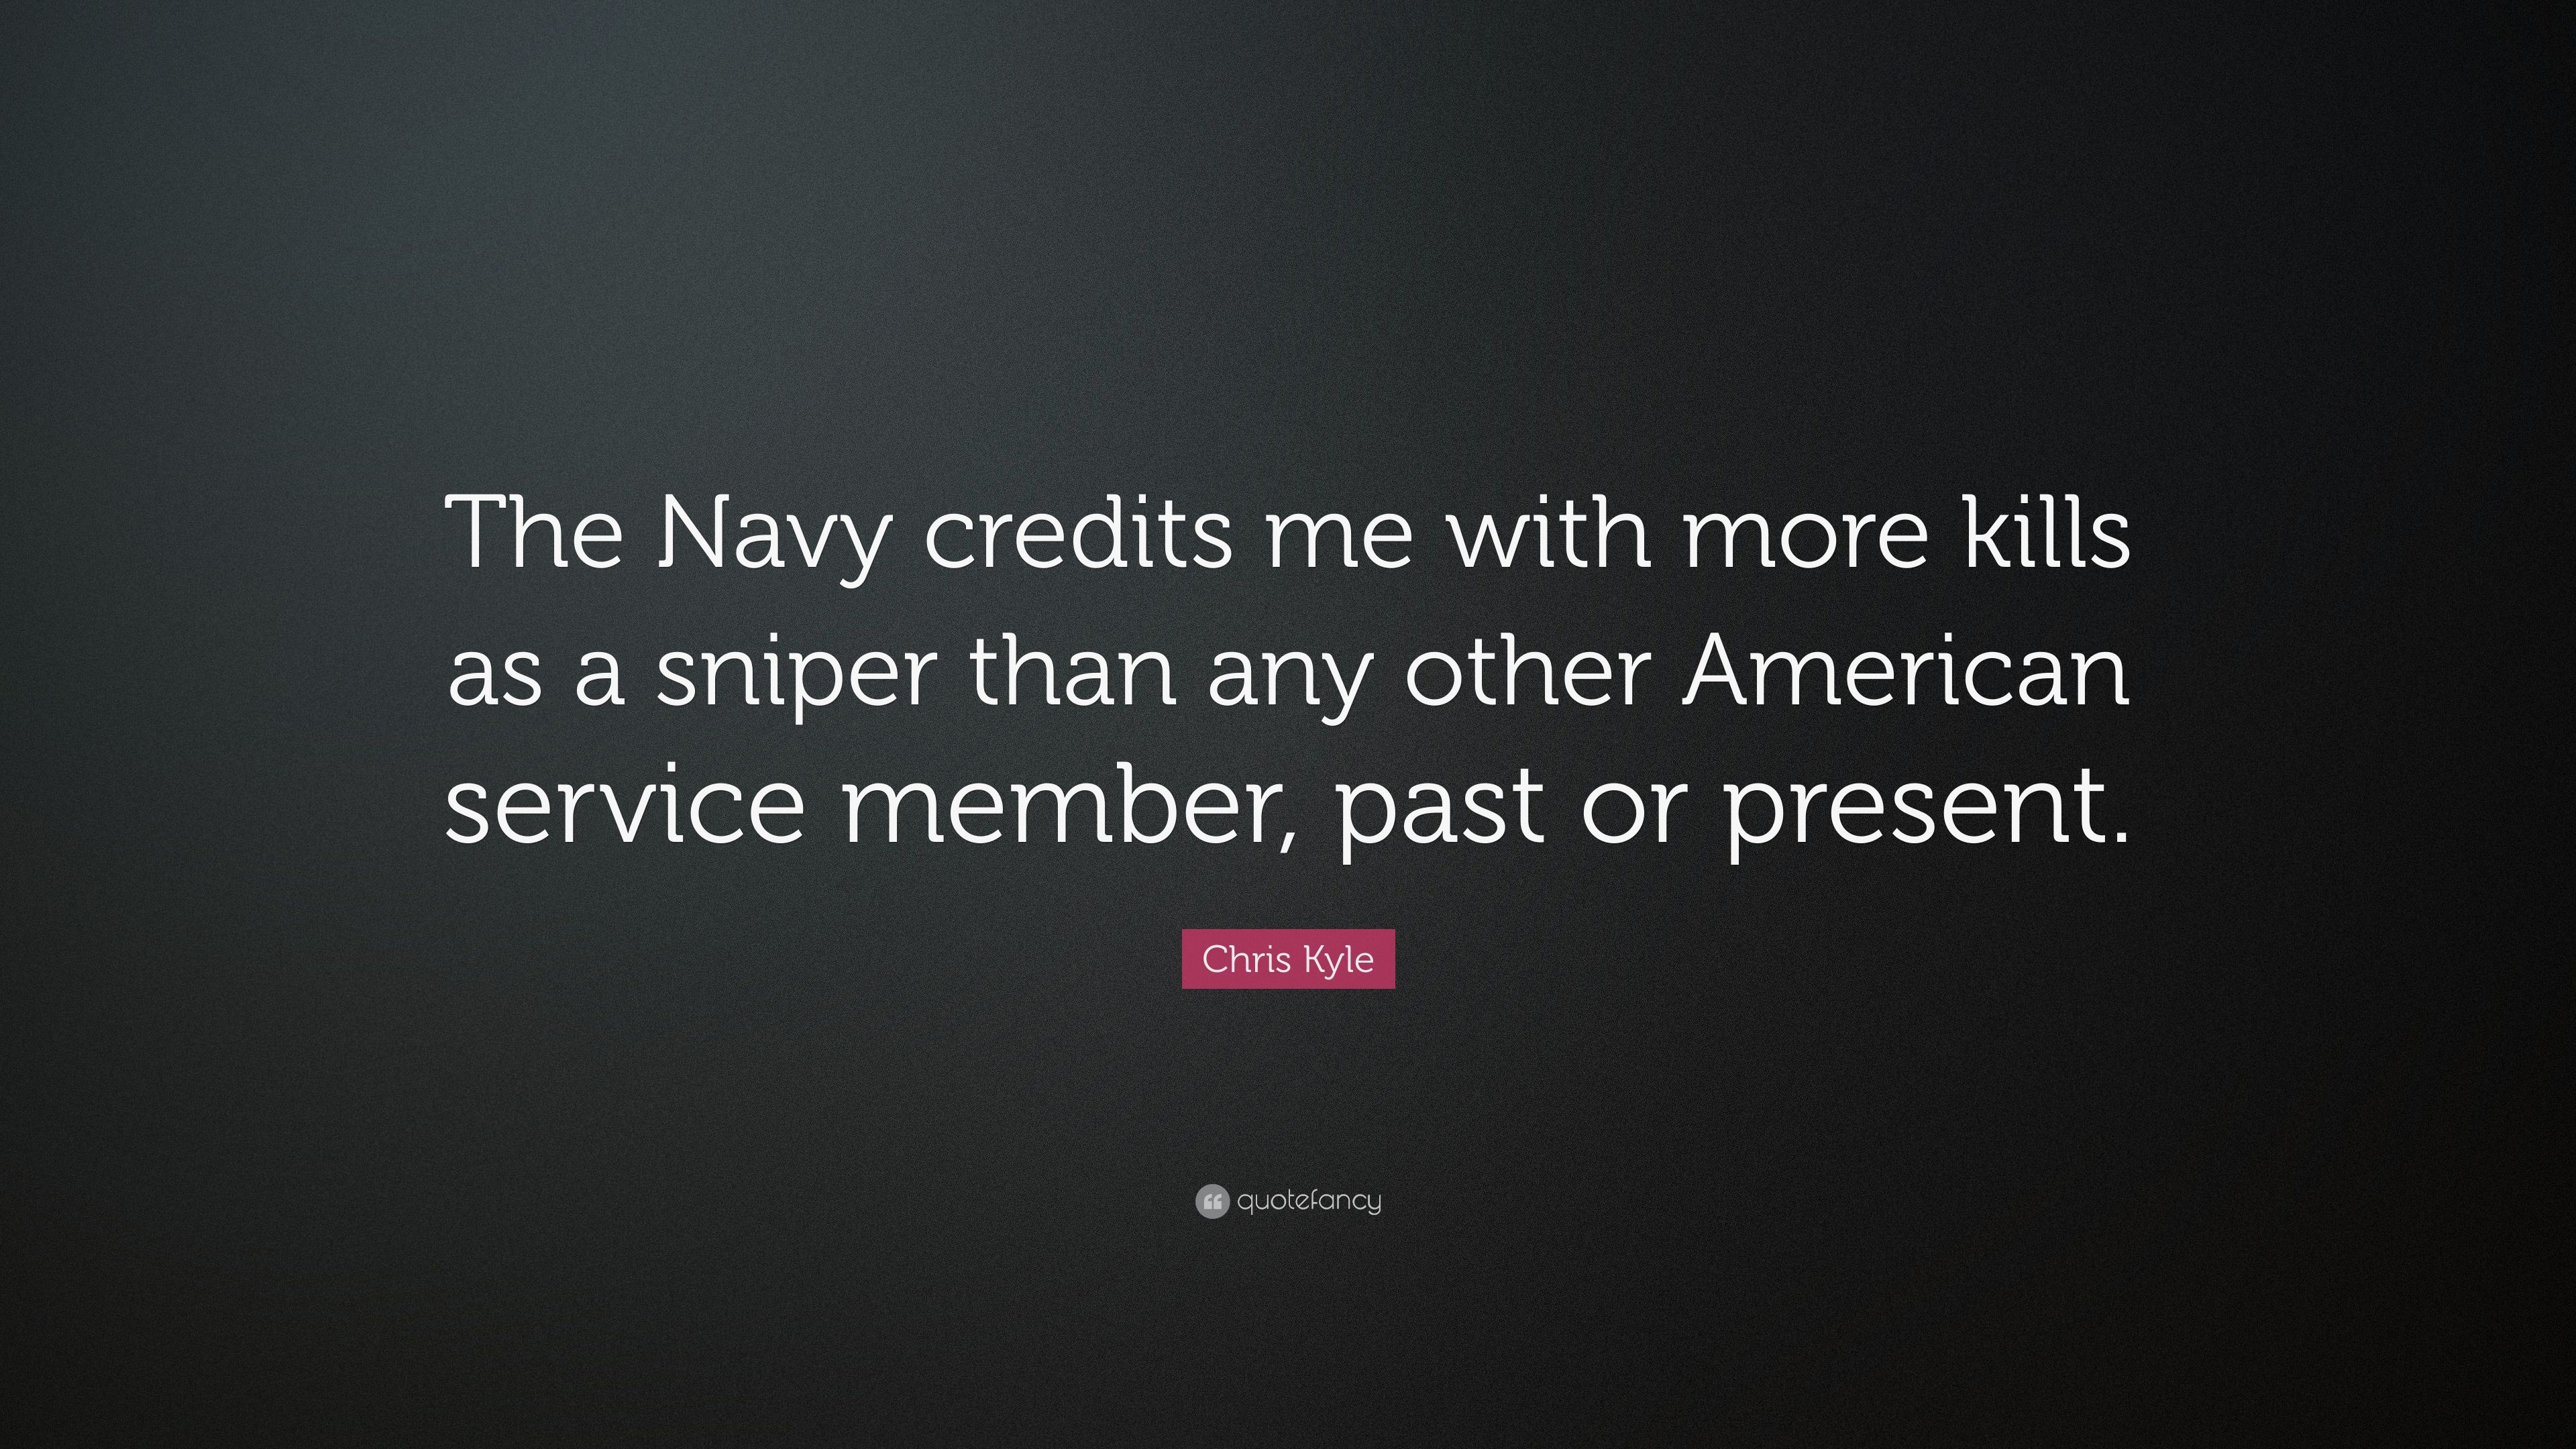 Chris Kyle Quote: “The Navy credits me with more kills as a sniper